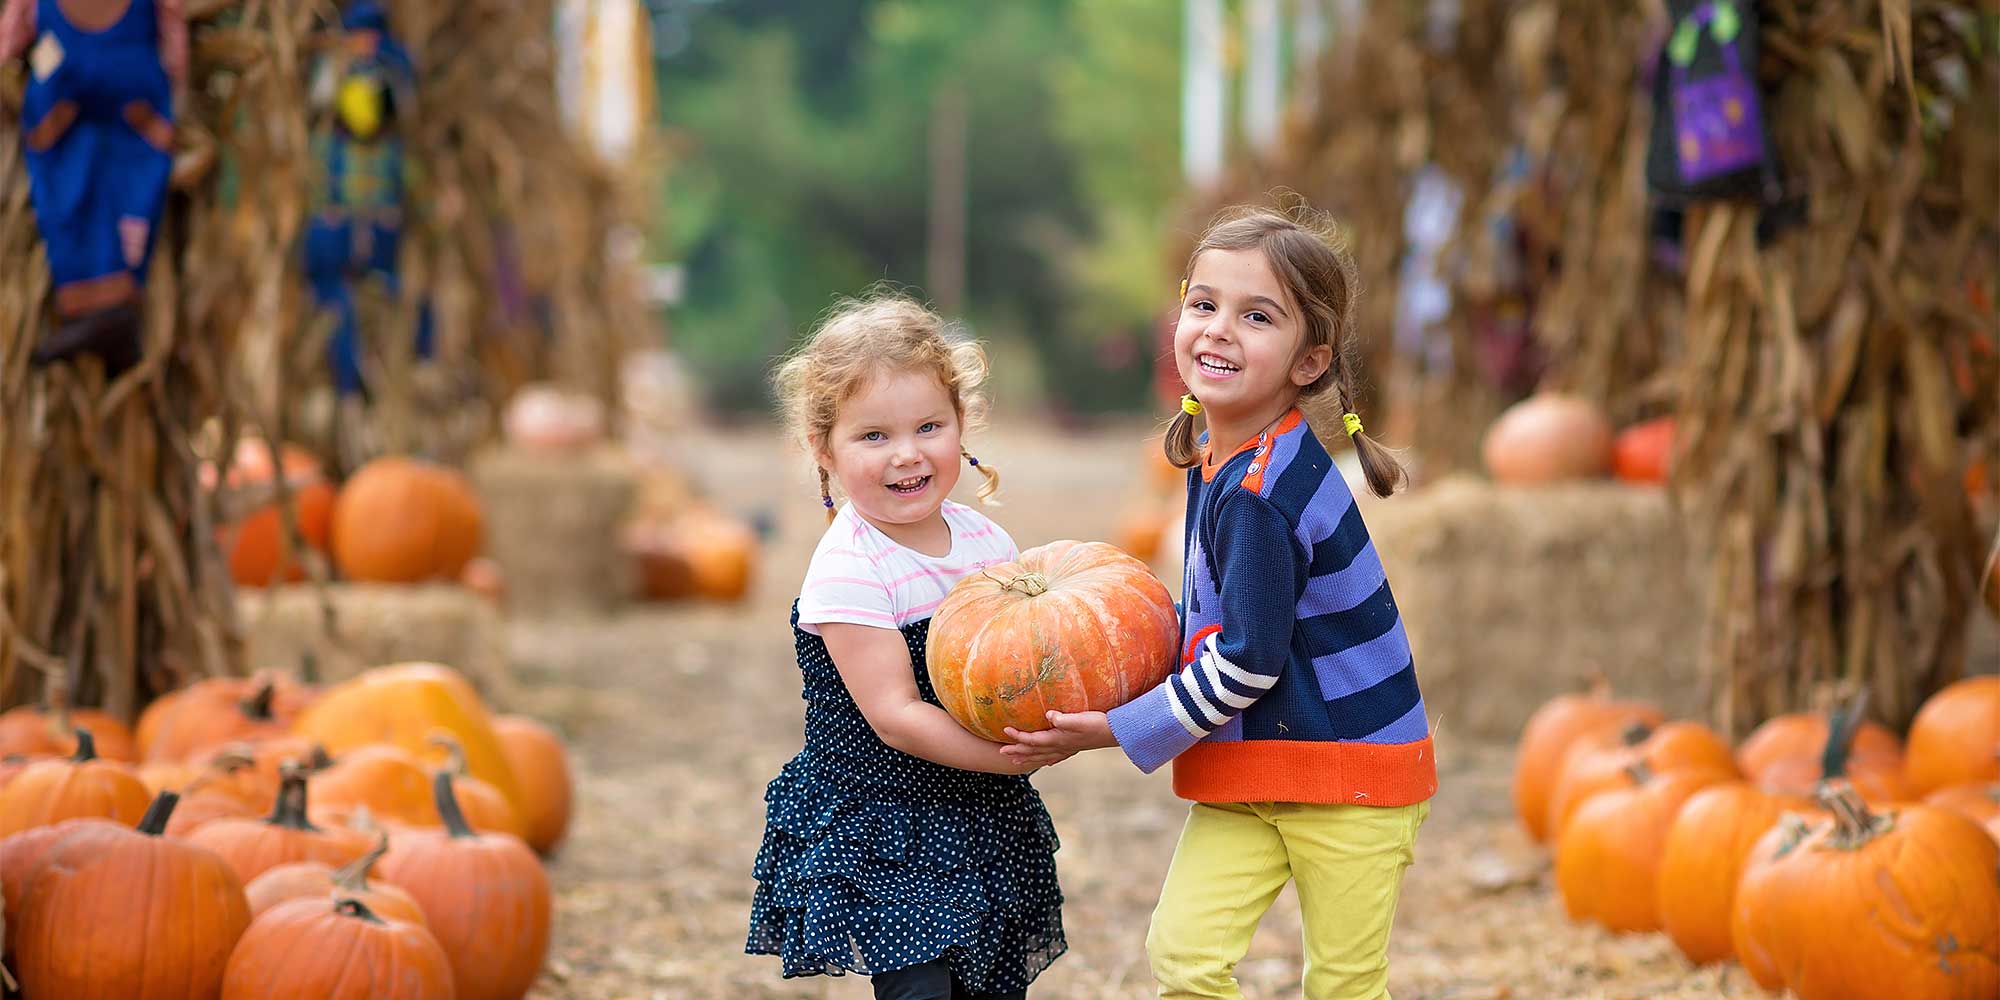 Pick-your-own pumpkins at Uncle Shuck's Corn Maze and Pumpkin Patch